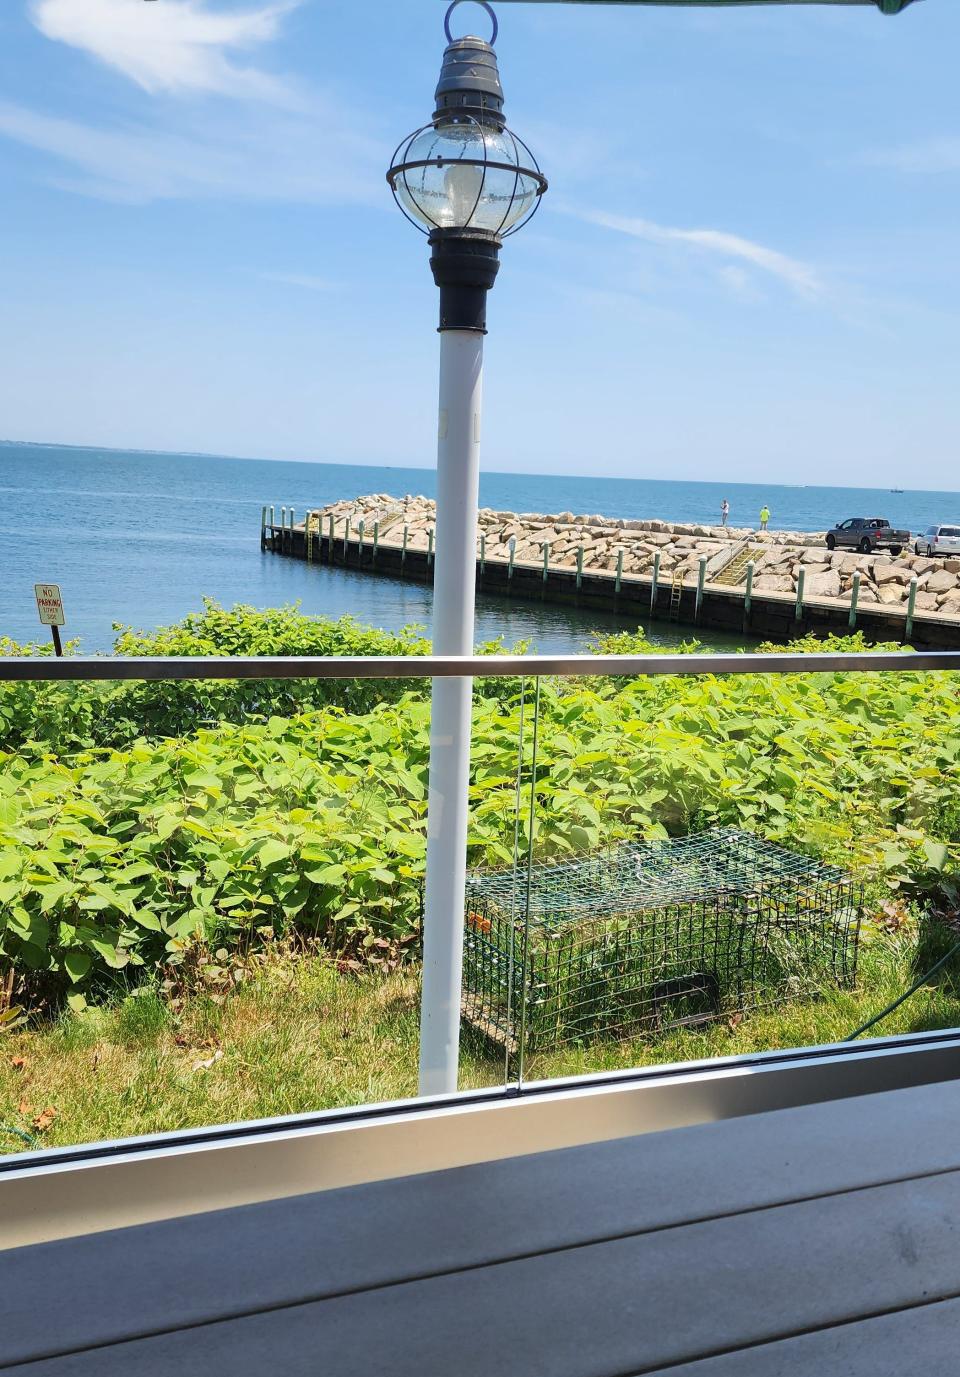 Take in the view of the water when you eat at a picnic table at Monahan's Clam Shack by the Sea, 190 Ocean Rd., Narragansett.